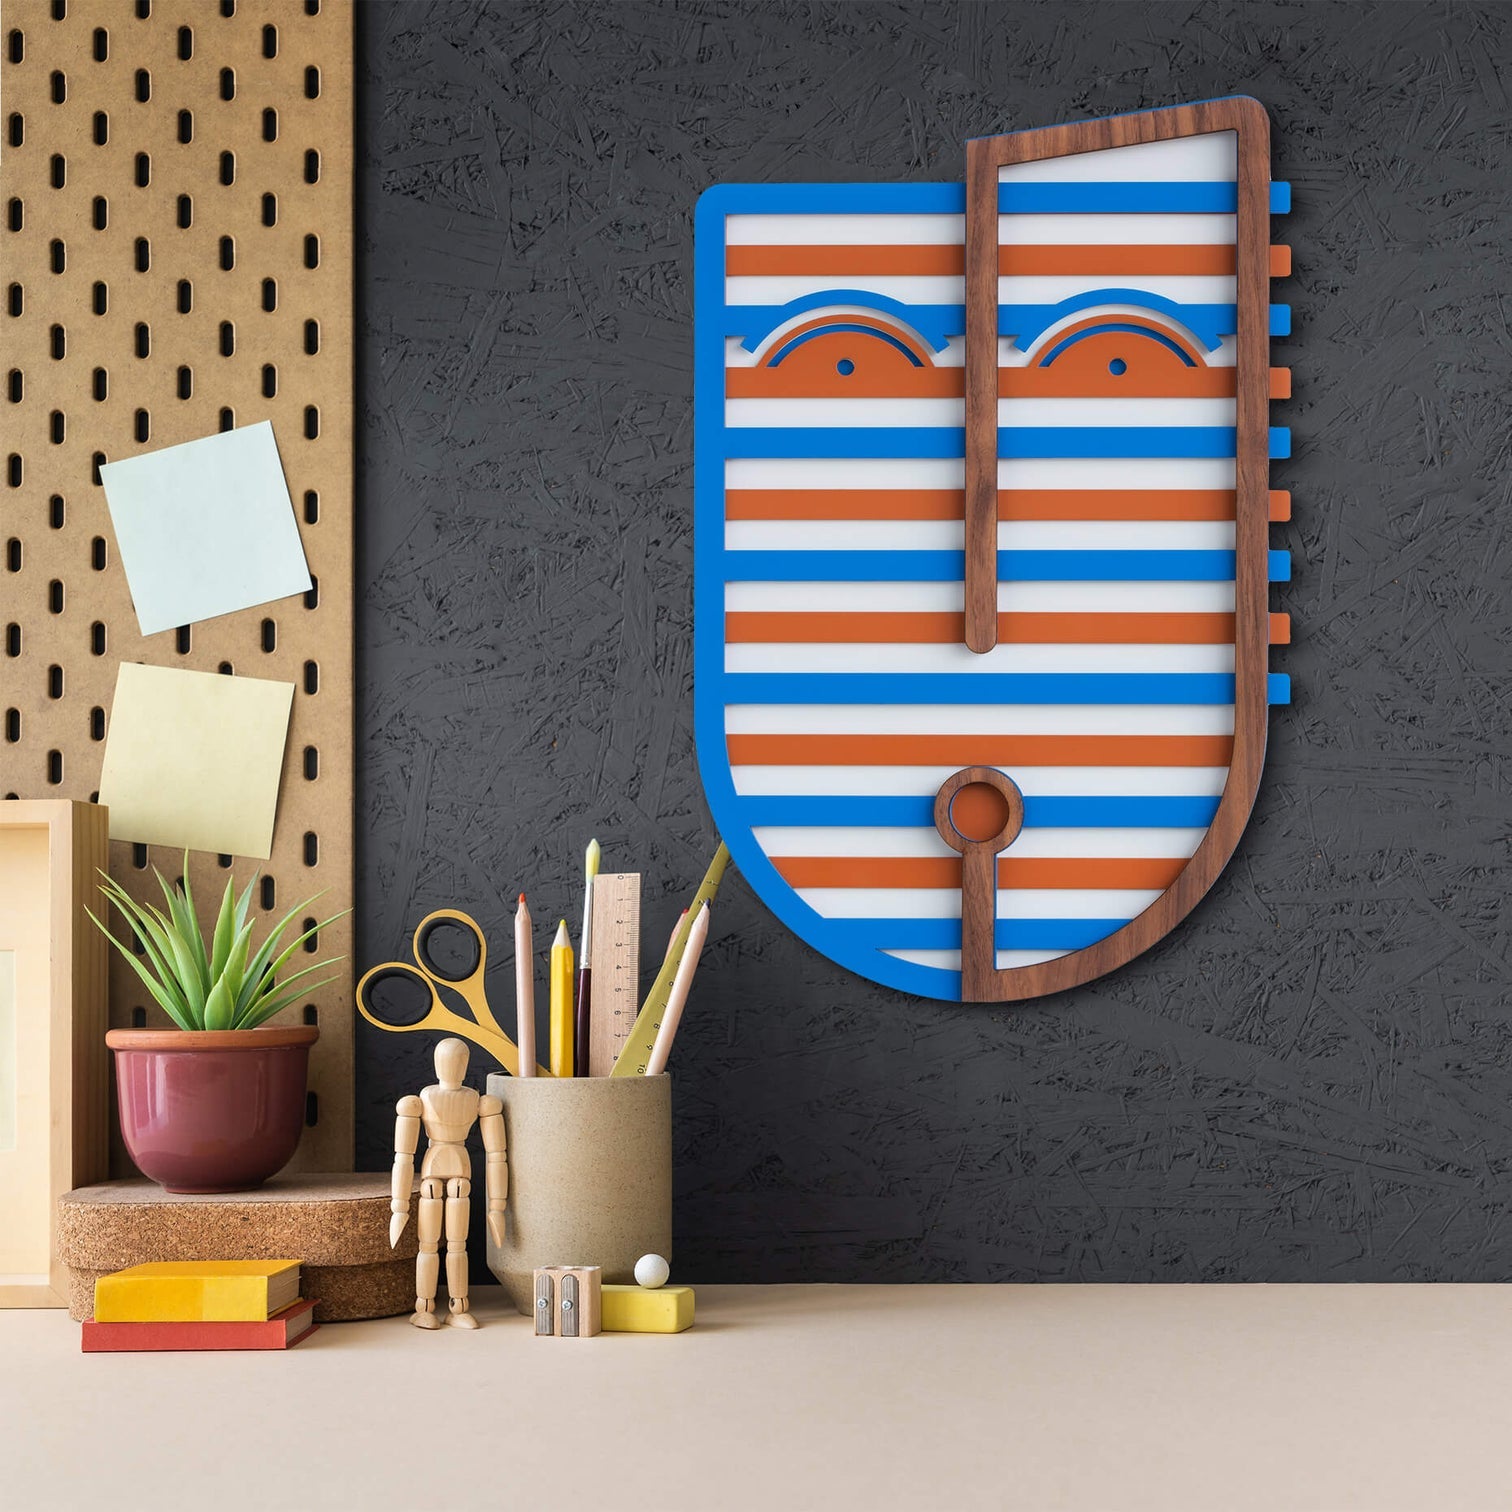 Your walls can now move with our colorful Picasso faces - Wall Hanging